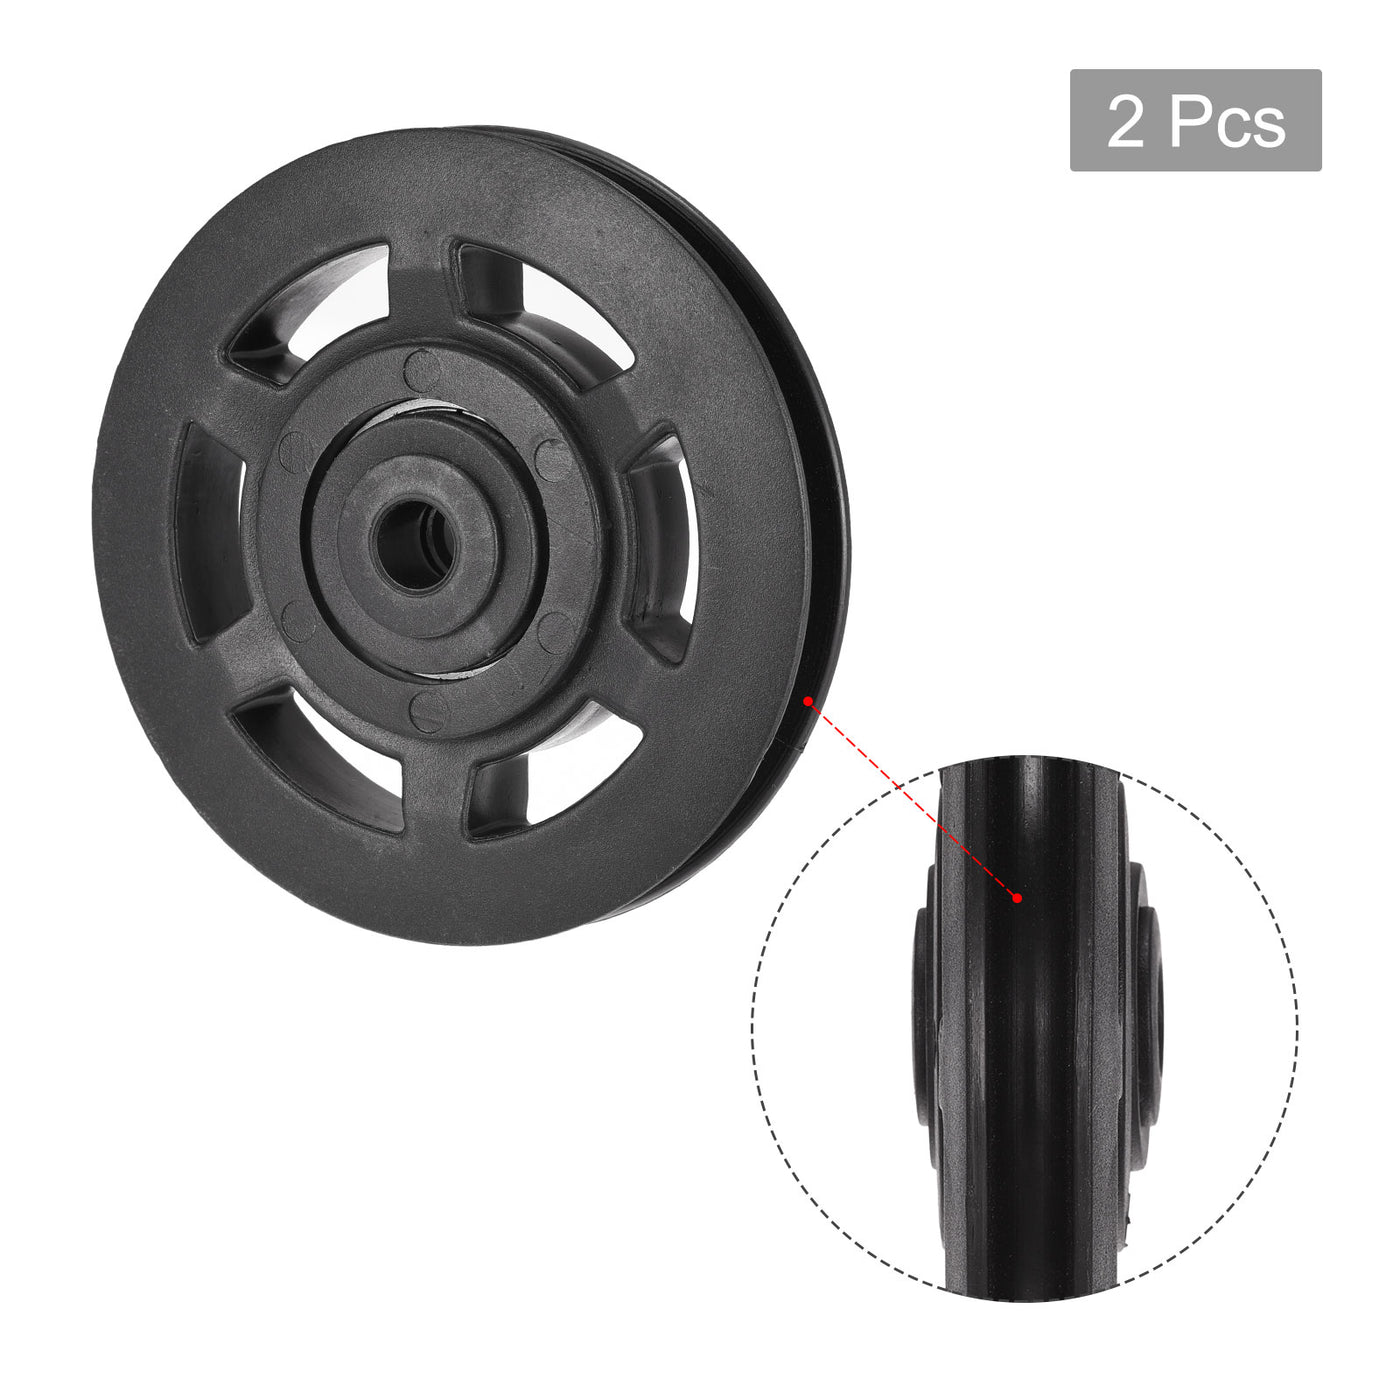 uxcell Uxcell 2pcs 96mm Bearing Pulley Wheel Cable Fitness Equipment Accessories